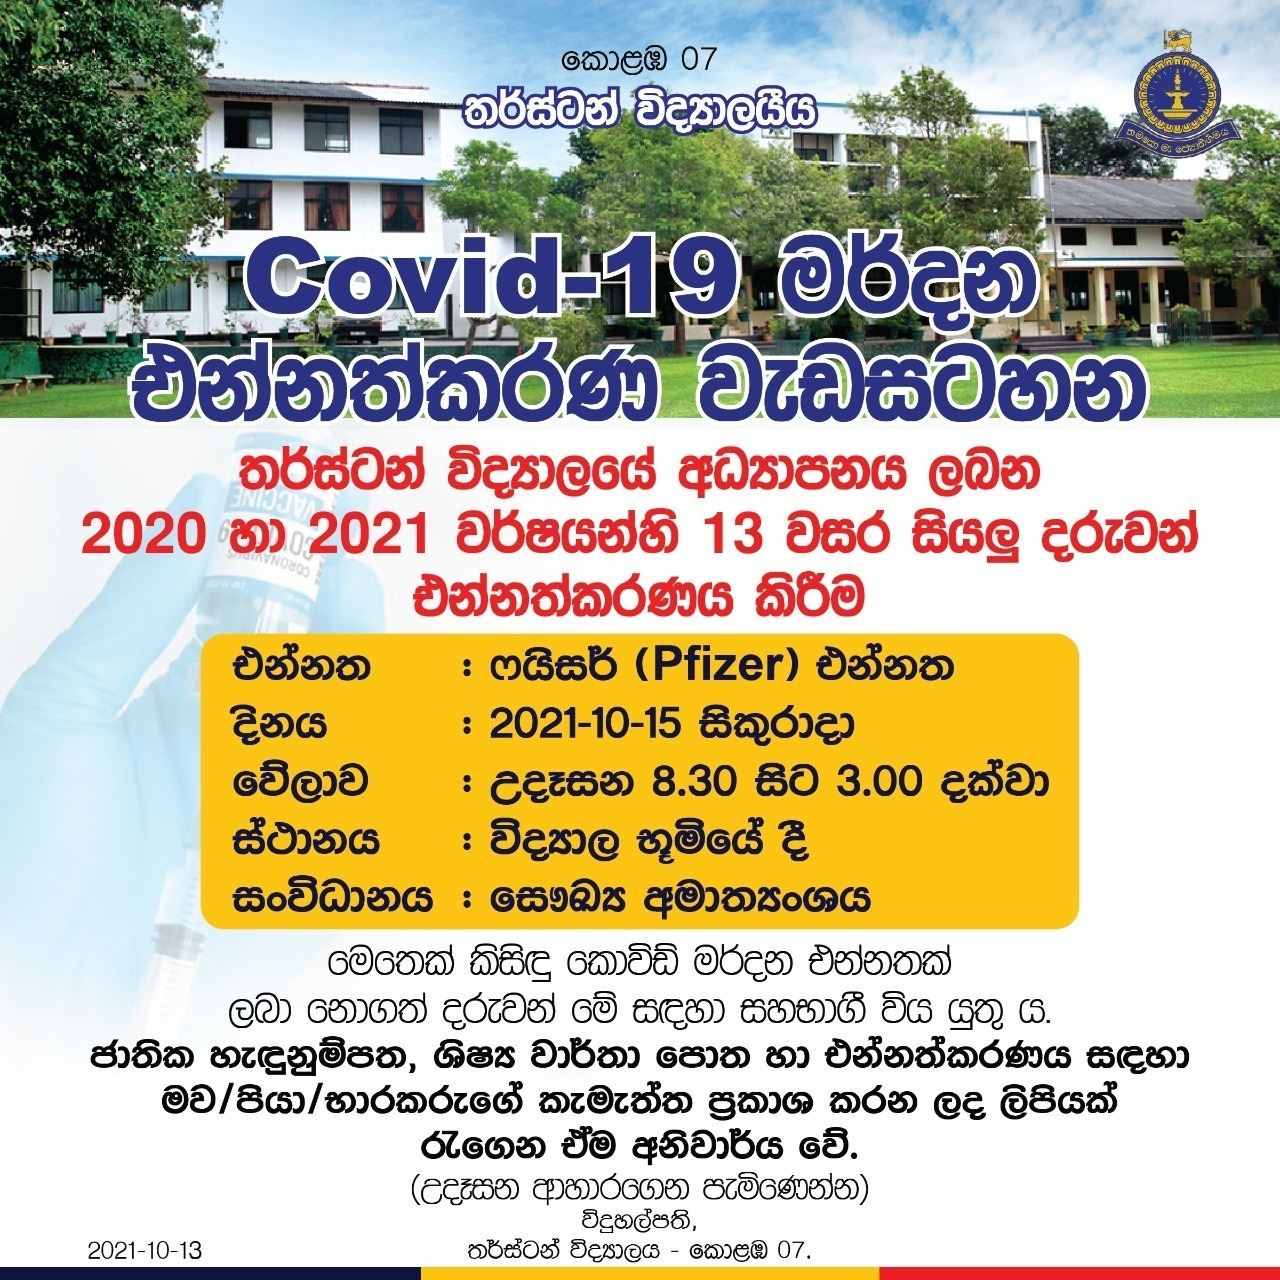 COVID-19 Vaccination Program for A/L Students - 2021